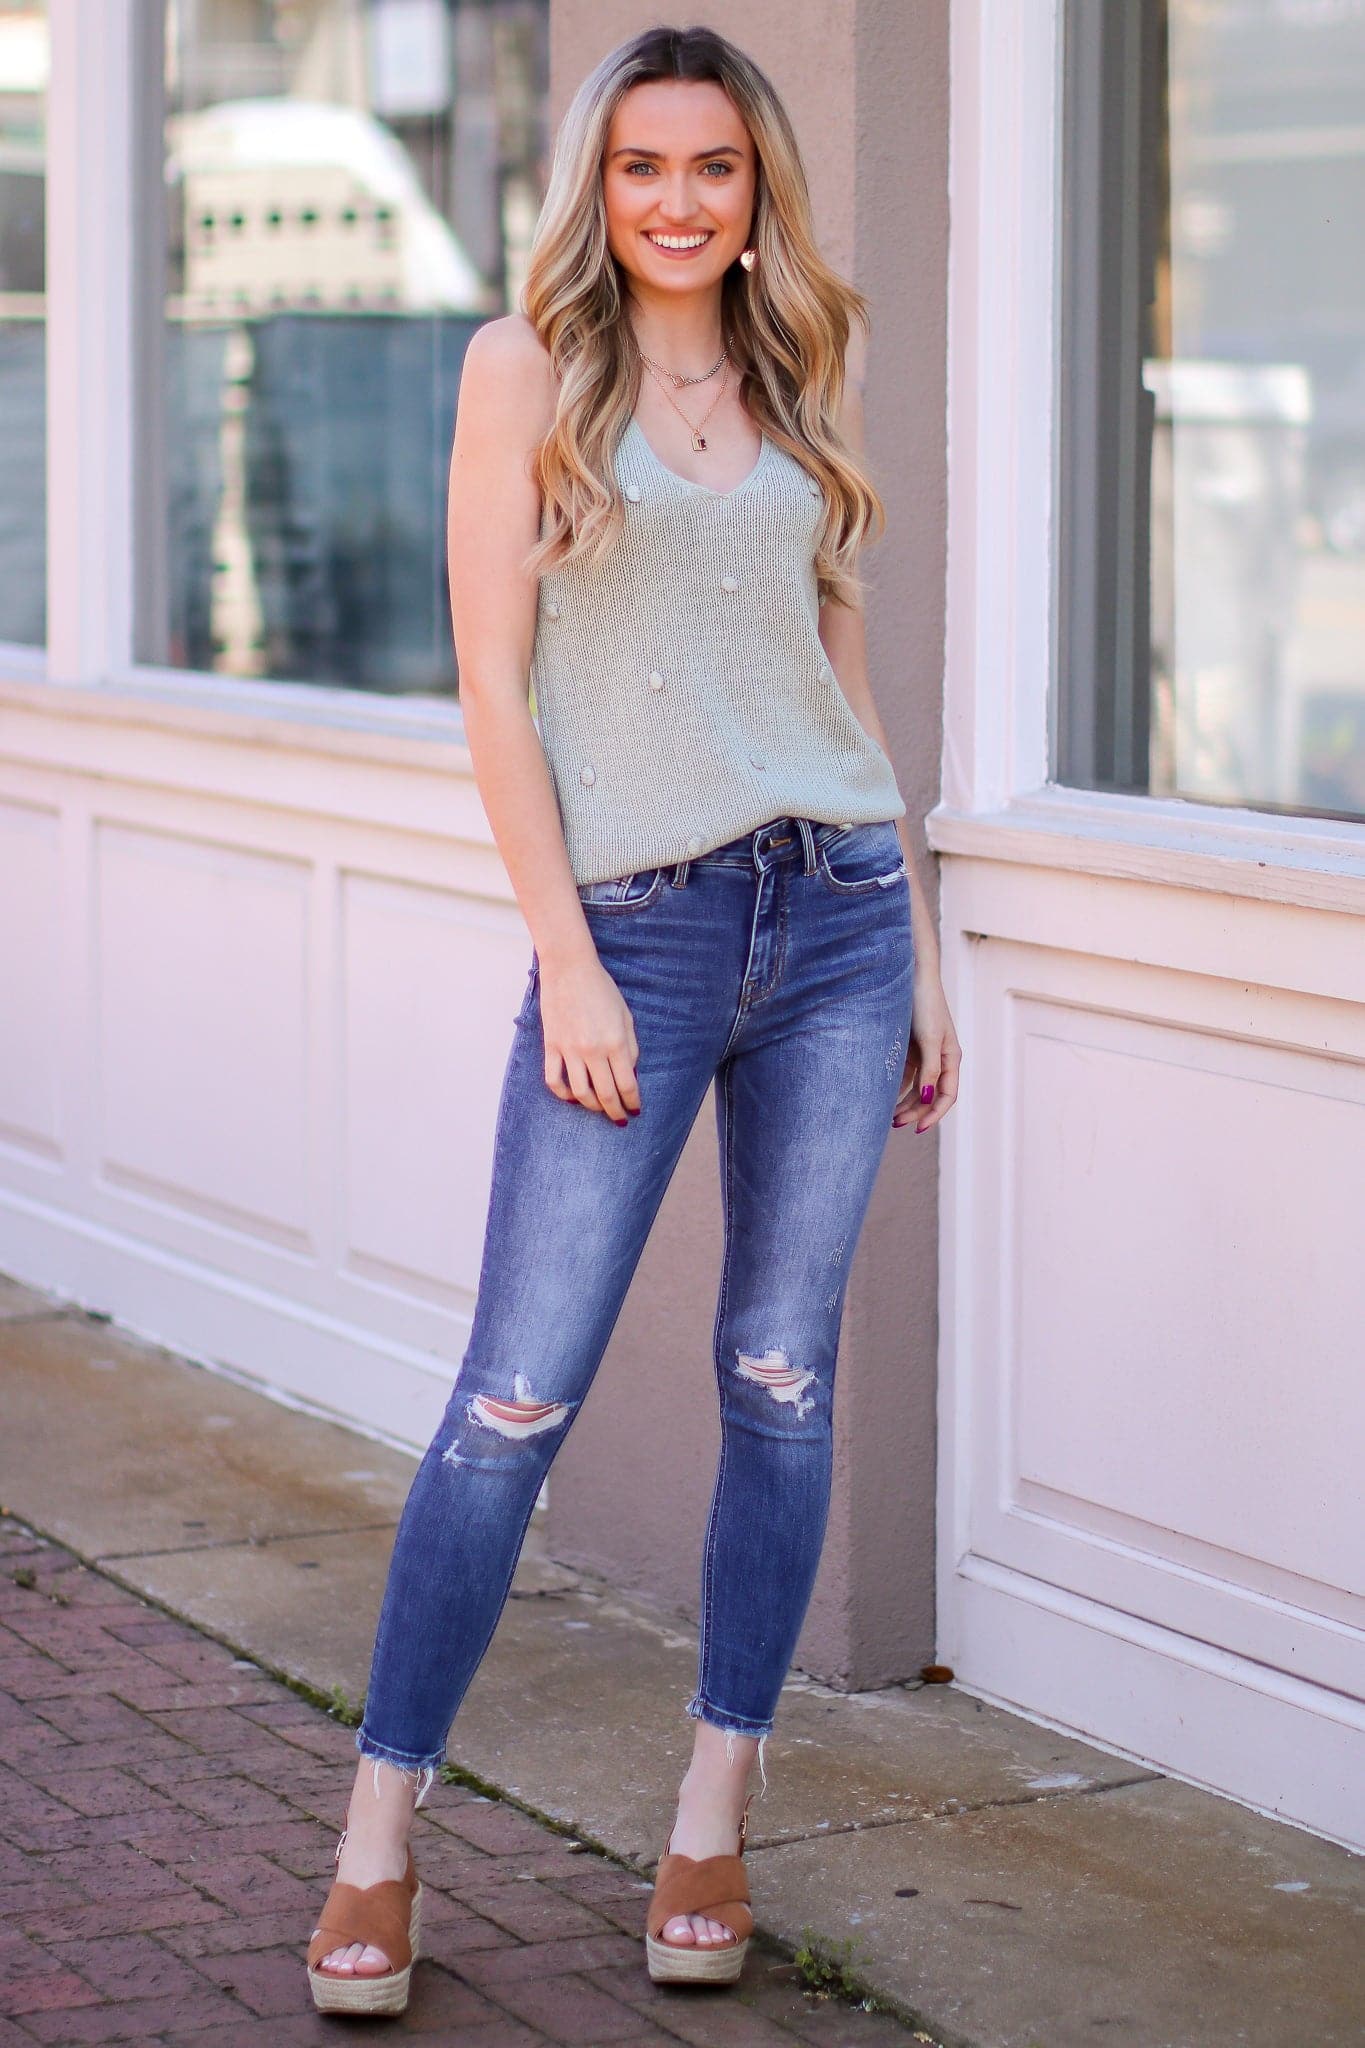  Farren High Rise Distressed Ankle Skinny Jeans - FINAL SALE - Madison and Mallory